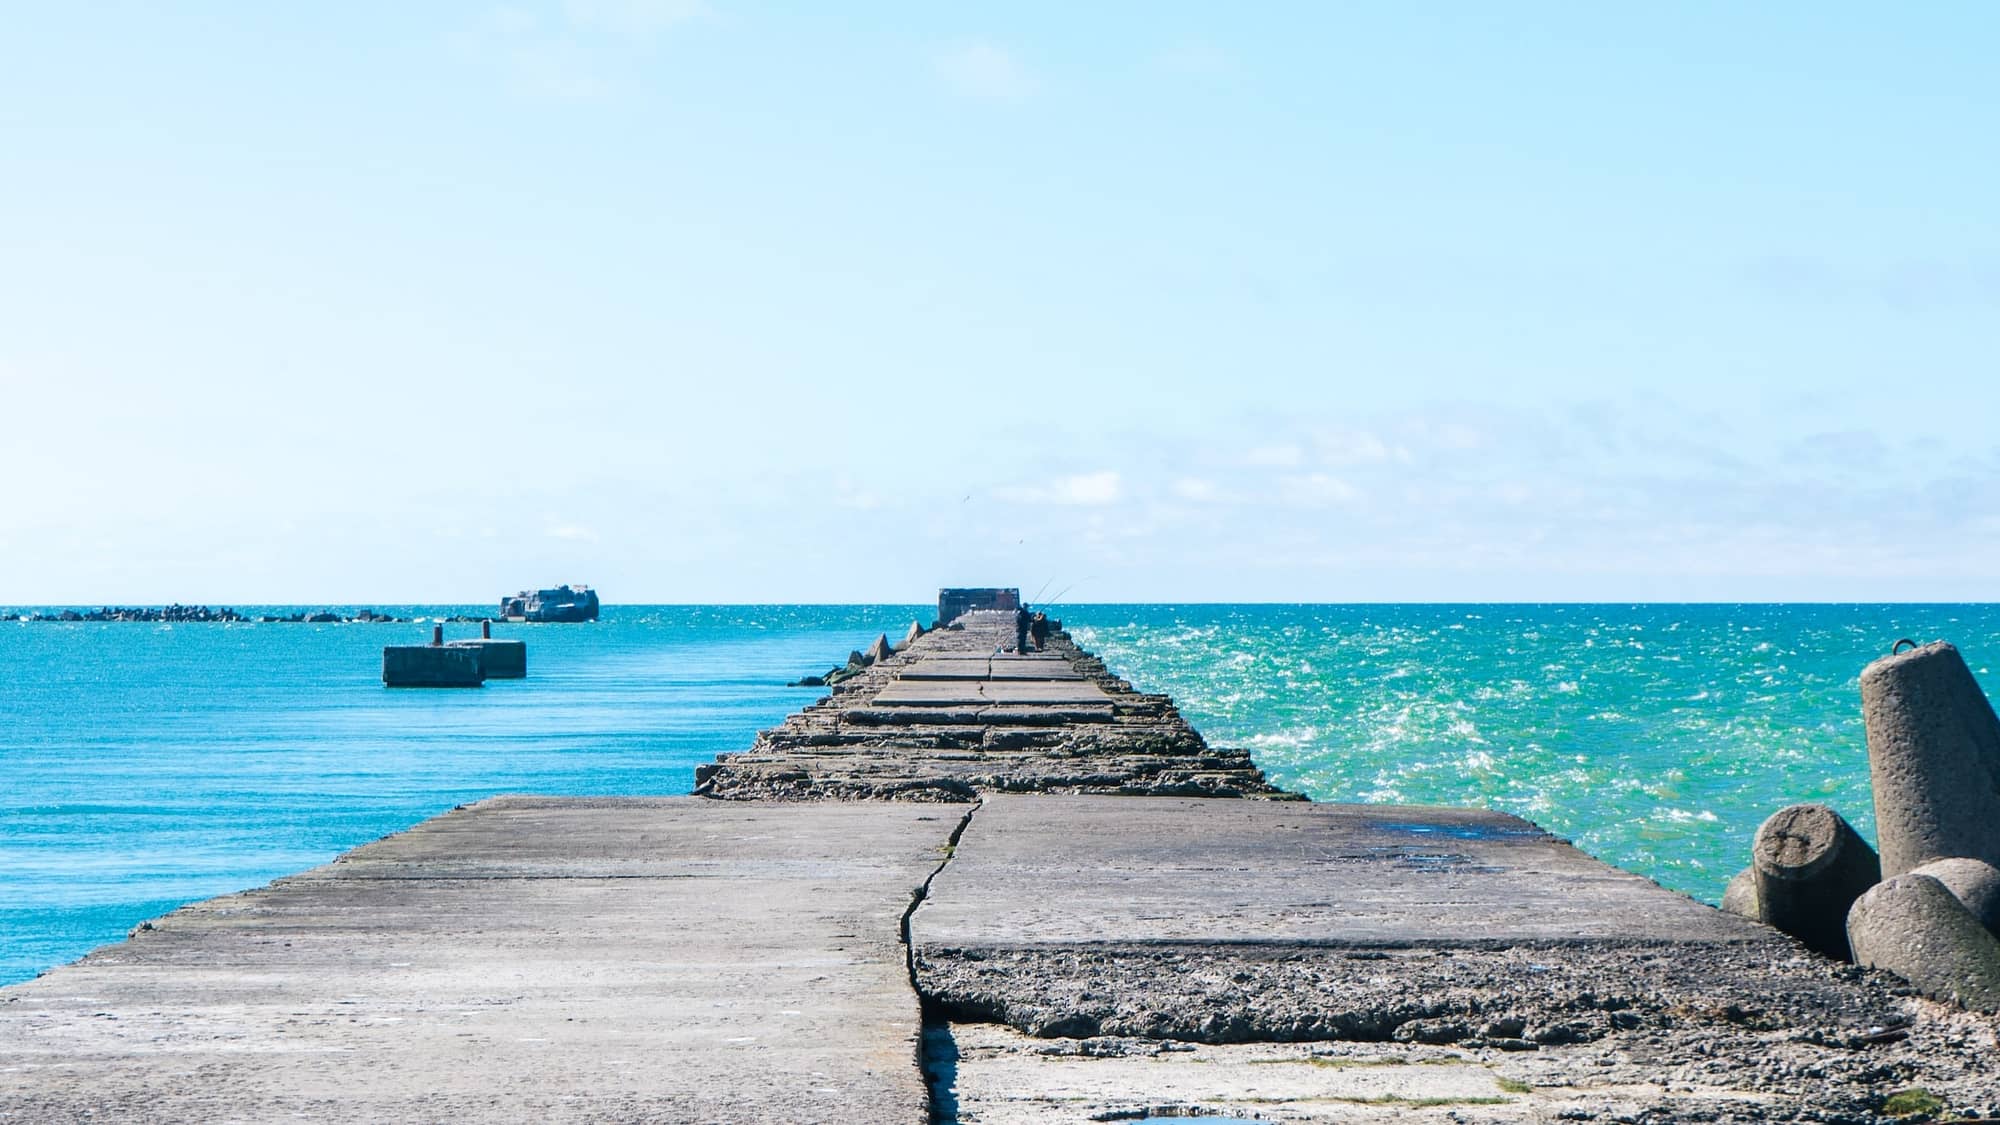 Image: A breakwater, the seas on one side rough, and the other calm, representing our different states of mind when overthinking.